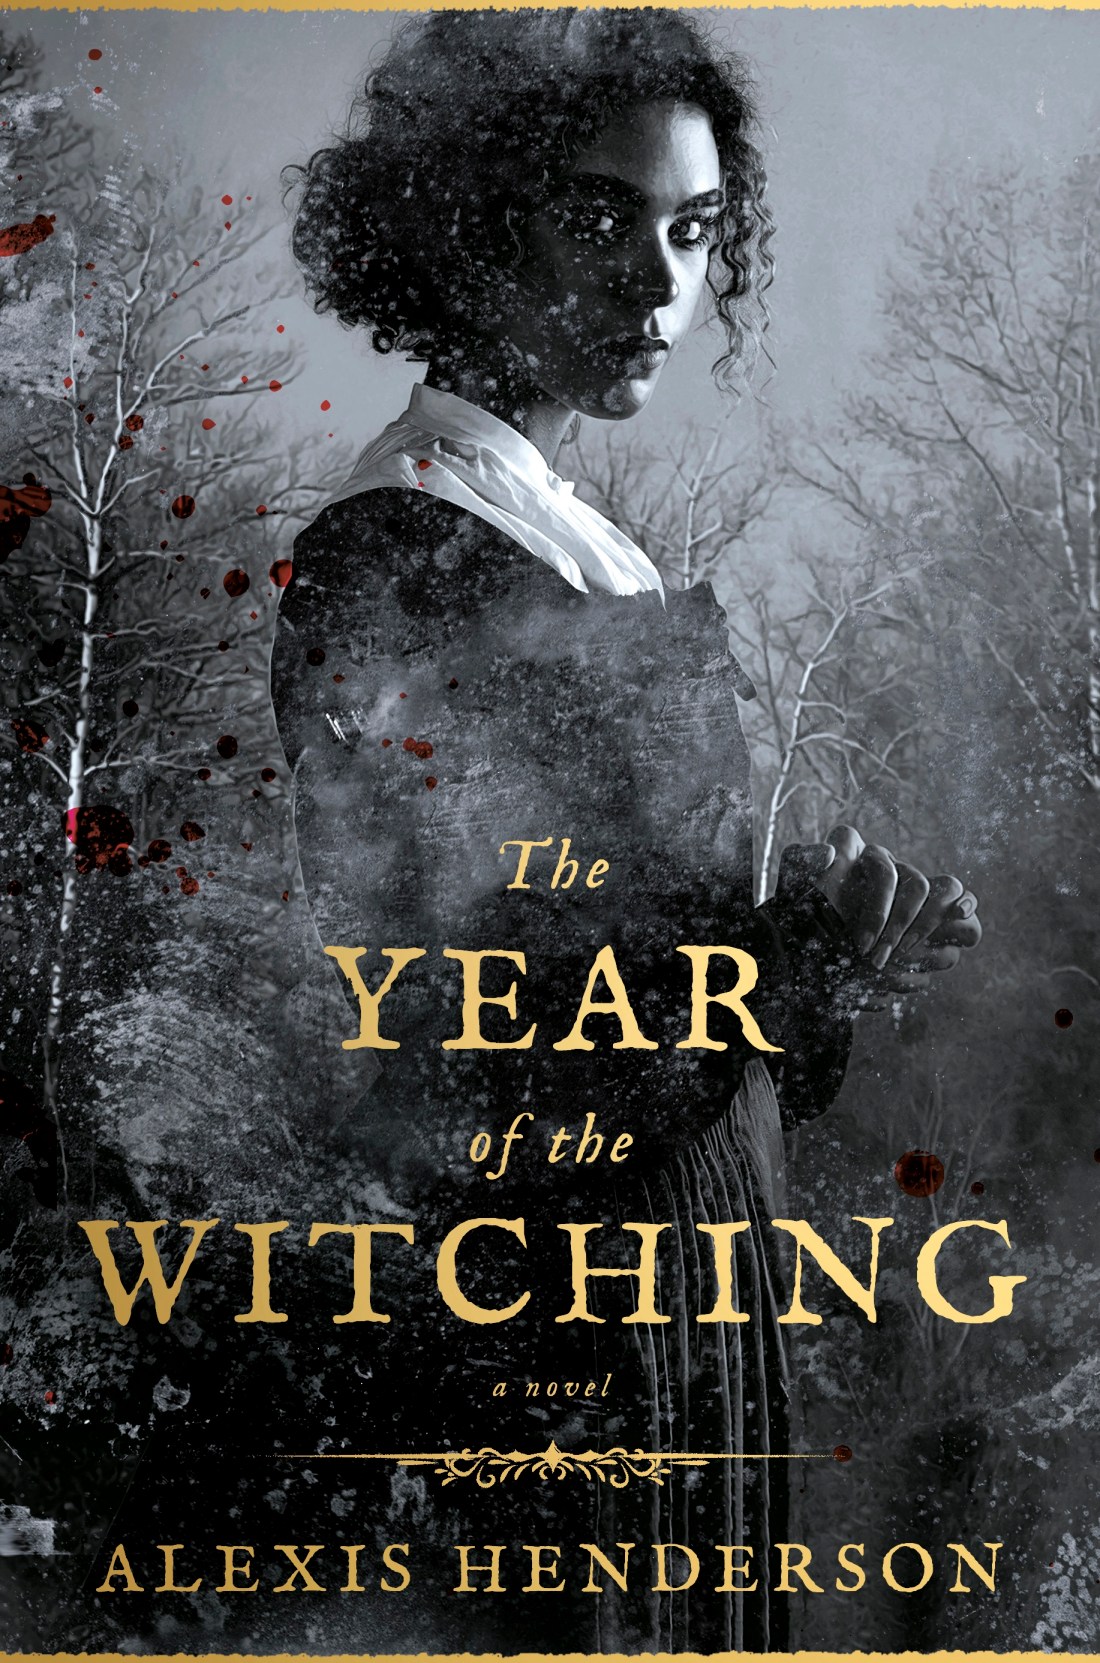 The Year of the Witching (Bethel) by Alexis Henderson